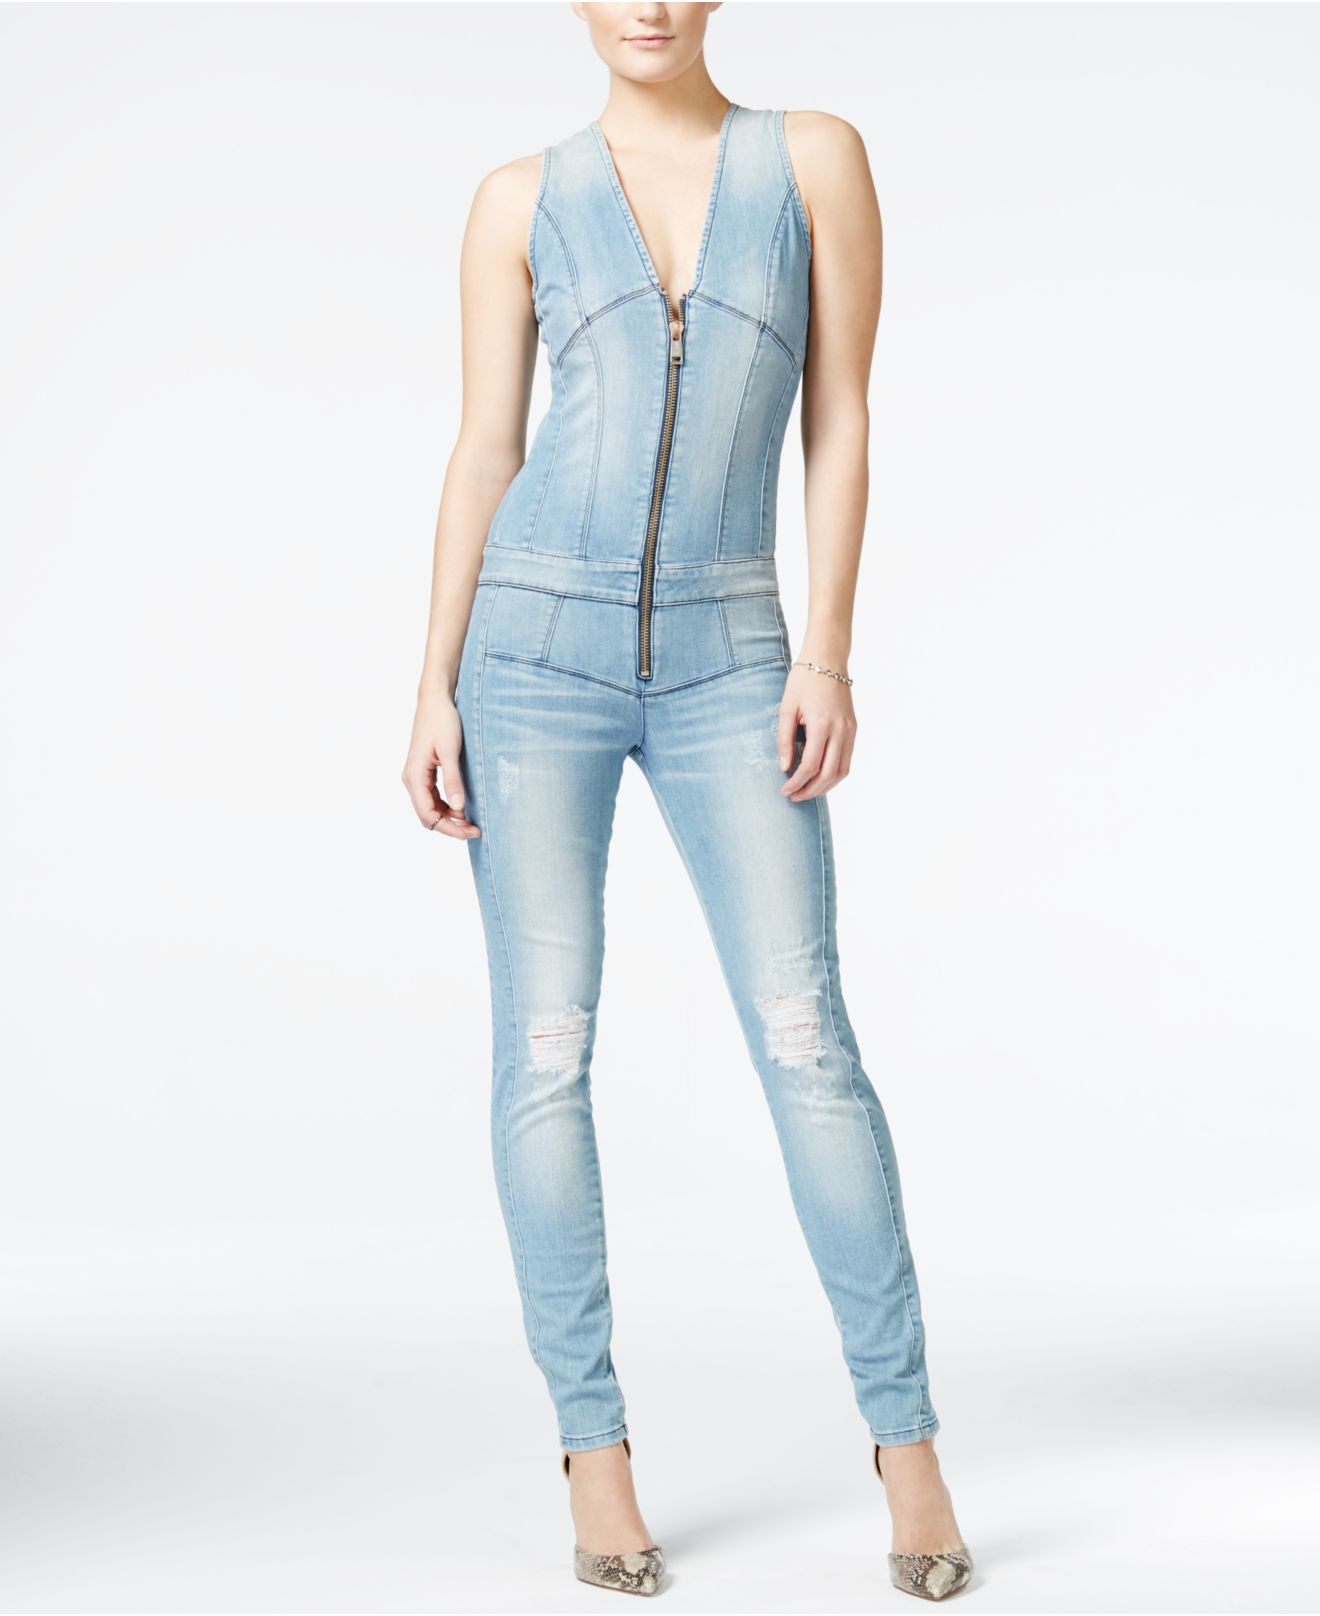 Lyst - Guess Ripped Denim Zip-up Jumpsuit in Blue